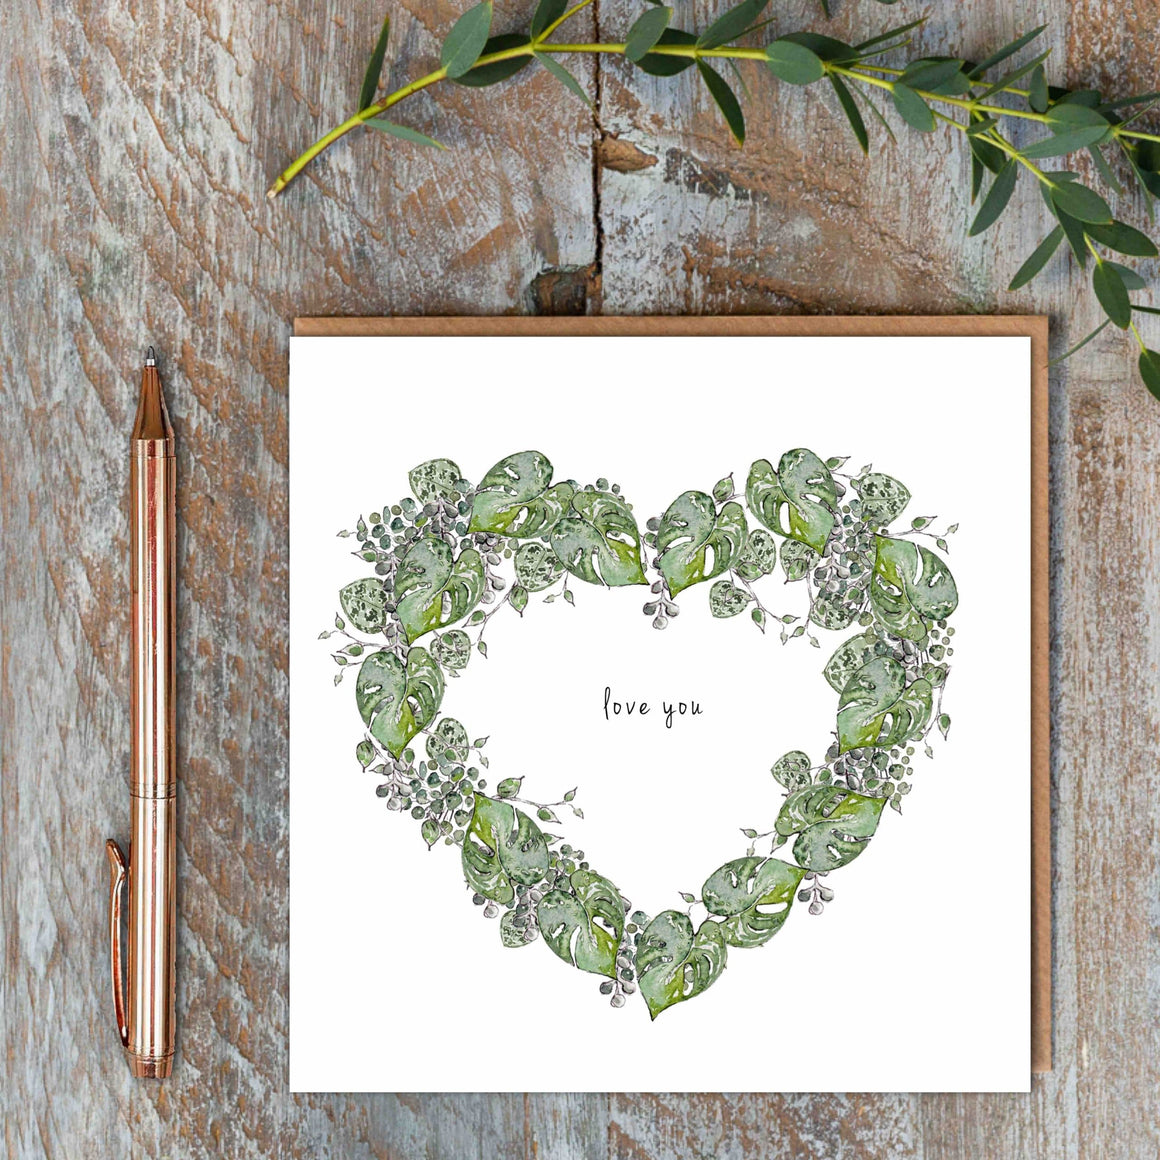 Toasted Crumpet Love You Greenery Heart Card